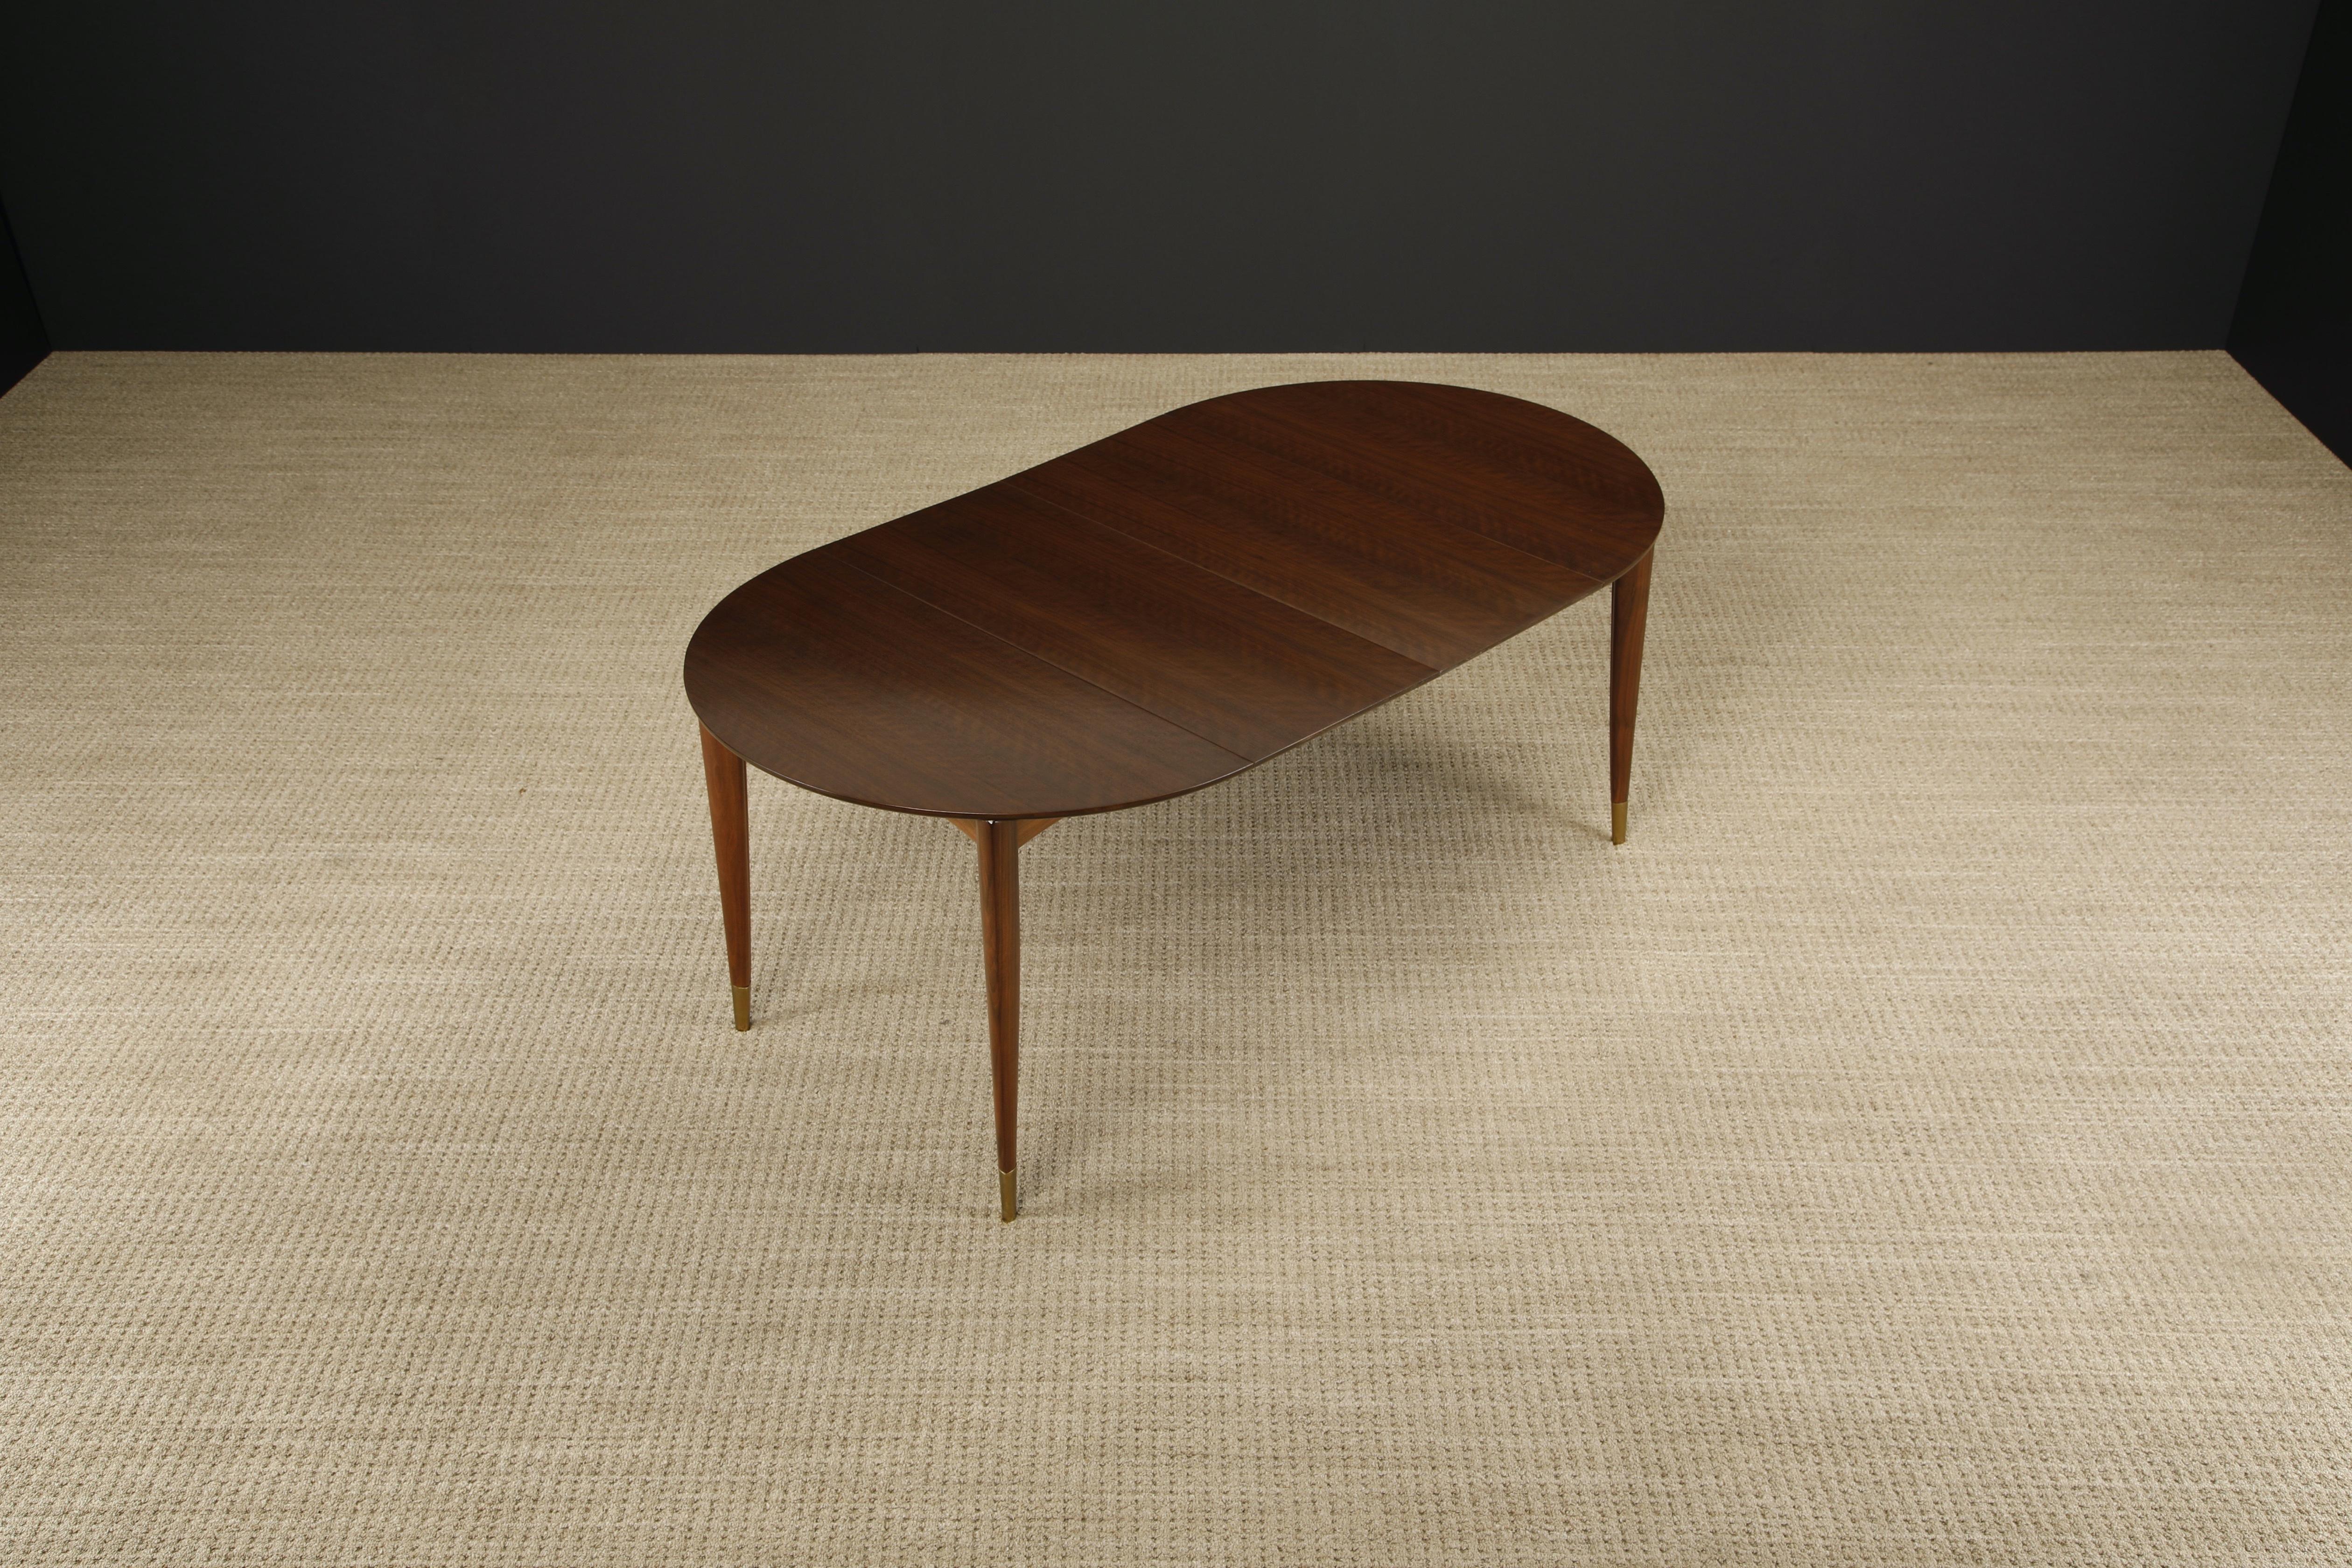 Mid-20th Century Gio Ponti for Singer & Sons #2135 Extendable Dining Table, c 1950, Refinished For Sale